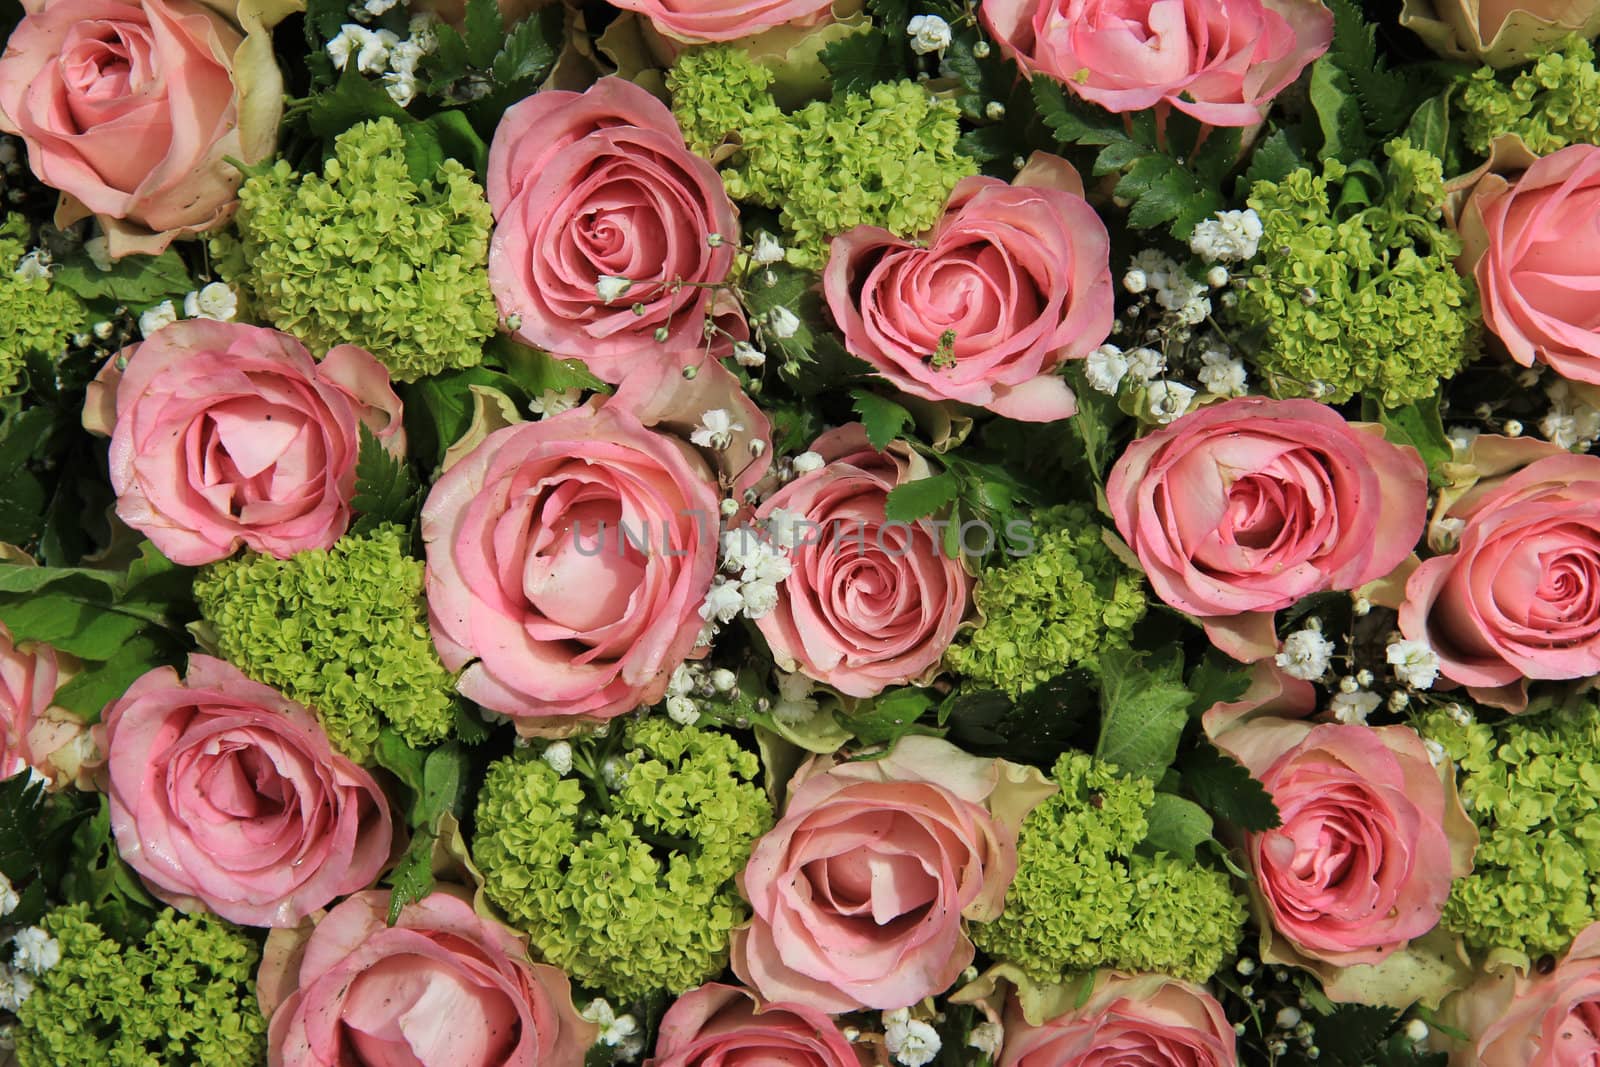 Small pink roses and white gypsophila in a wedding centerpiece